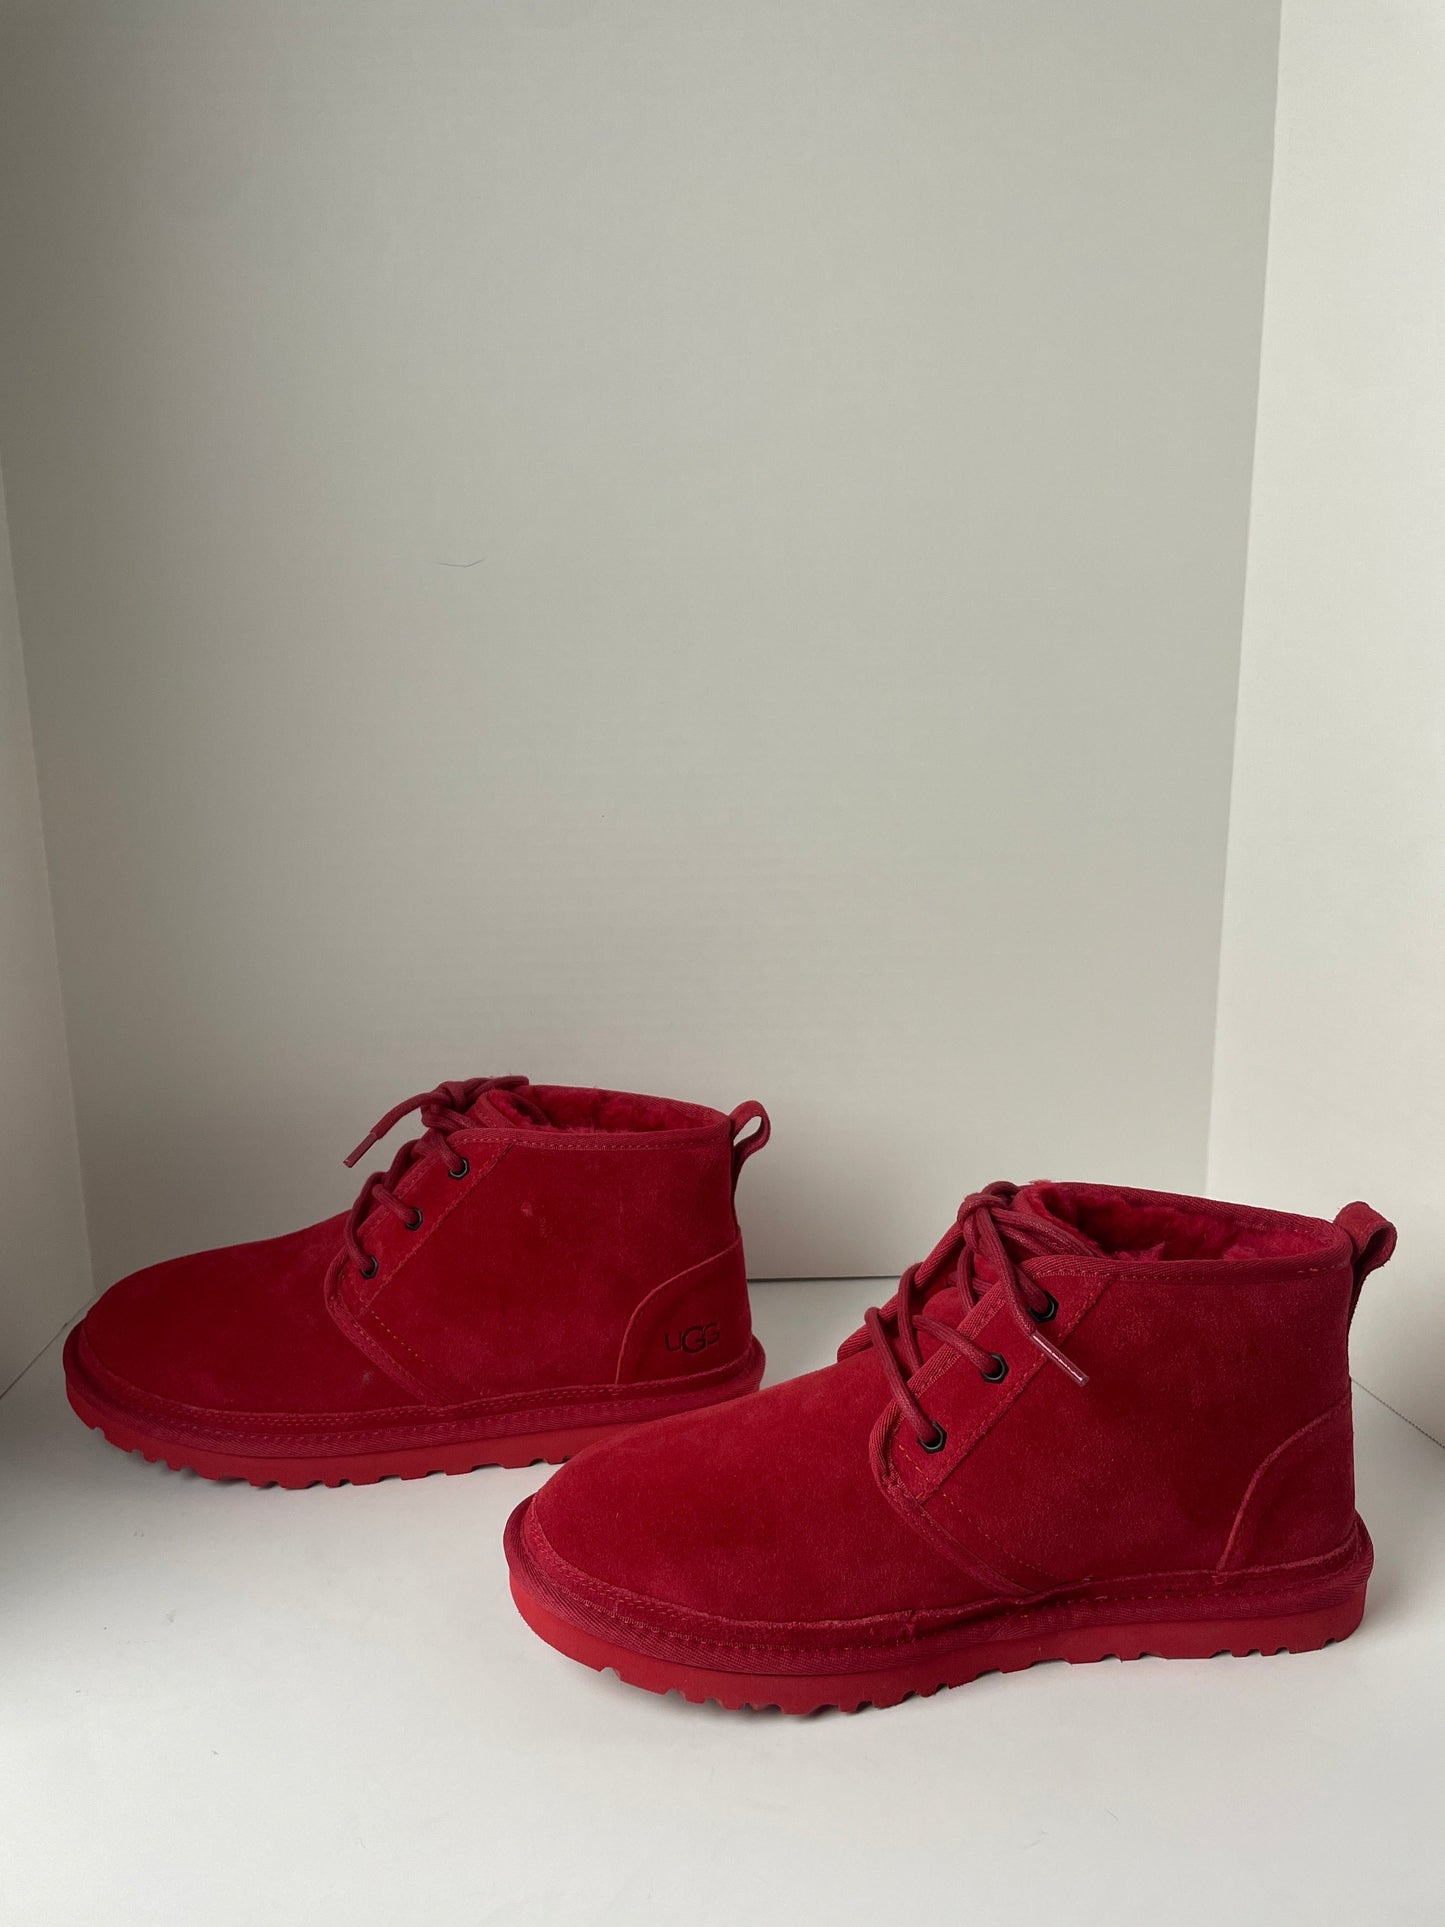 Red Shoes Flats Ugg, Size 9